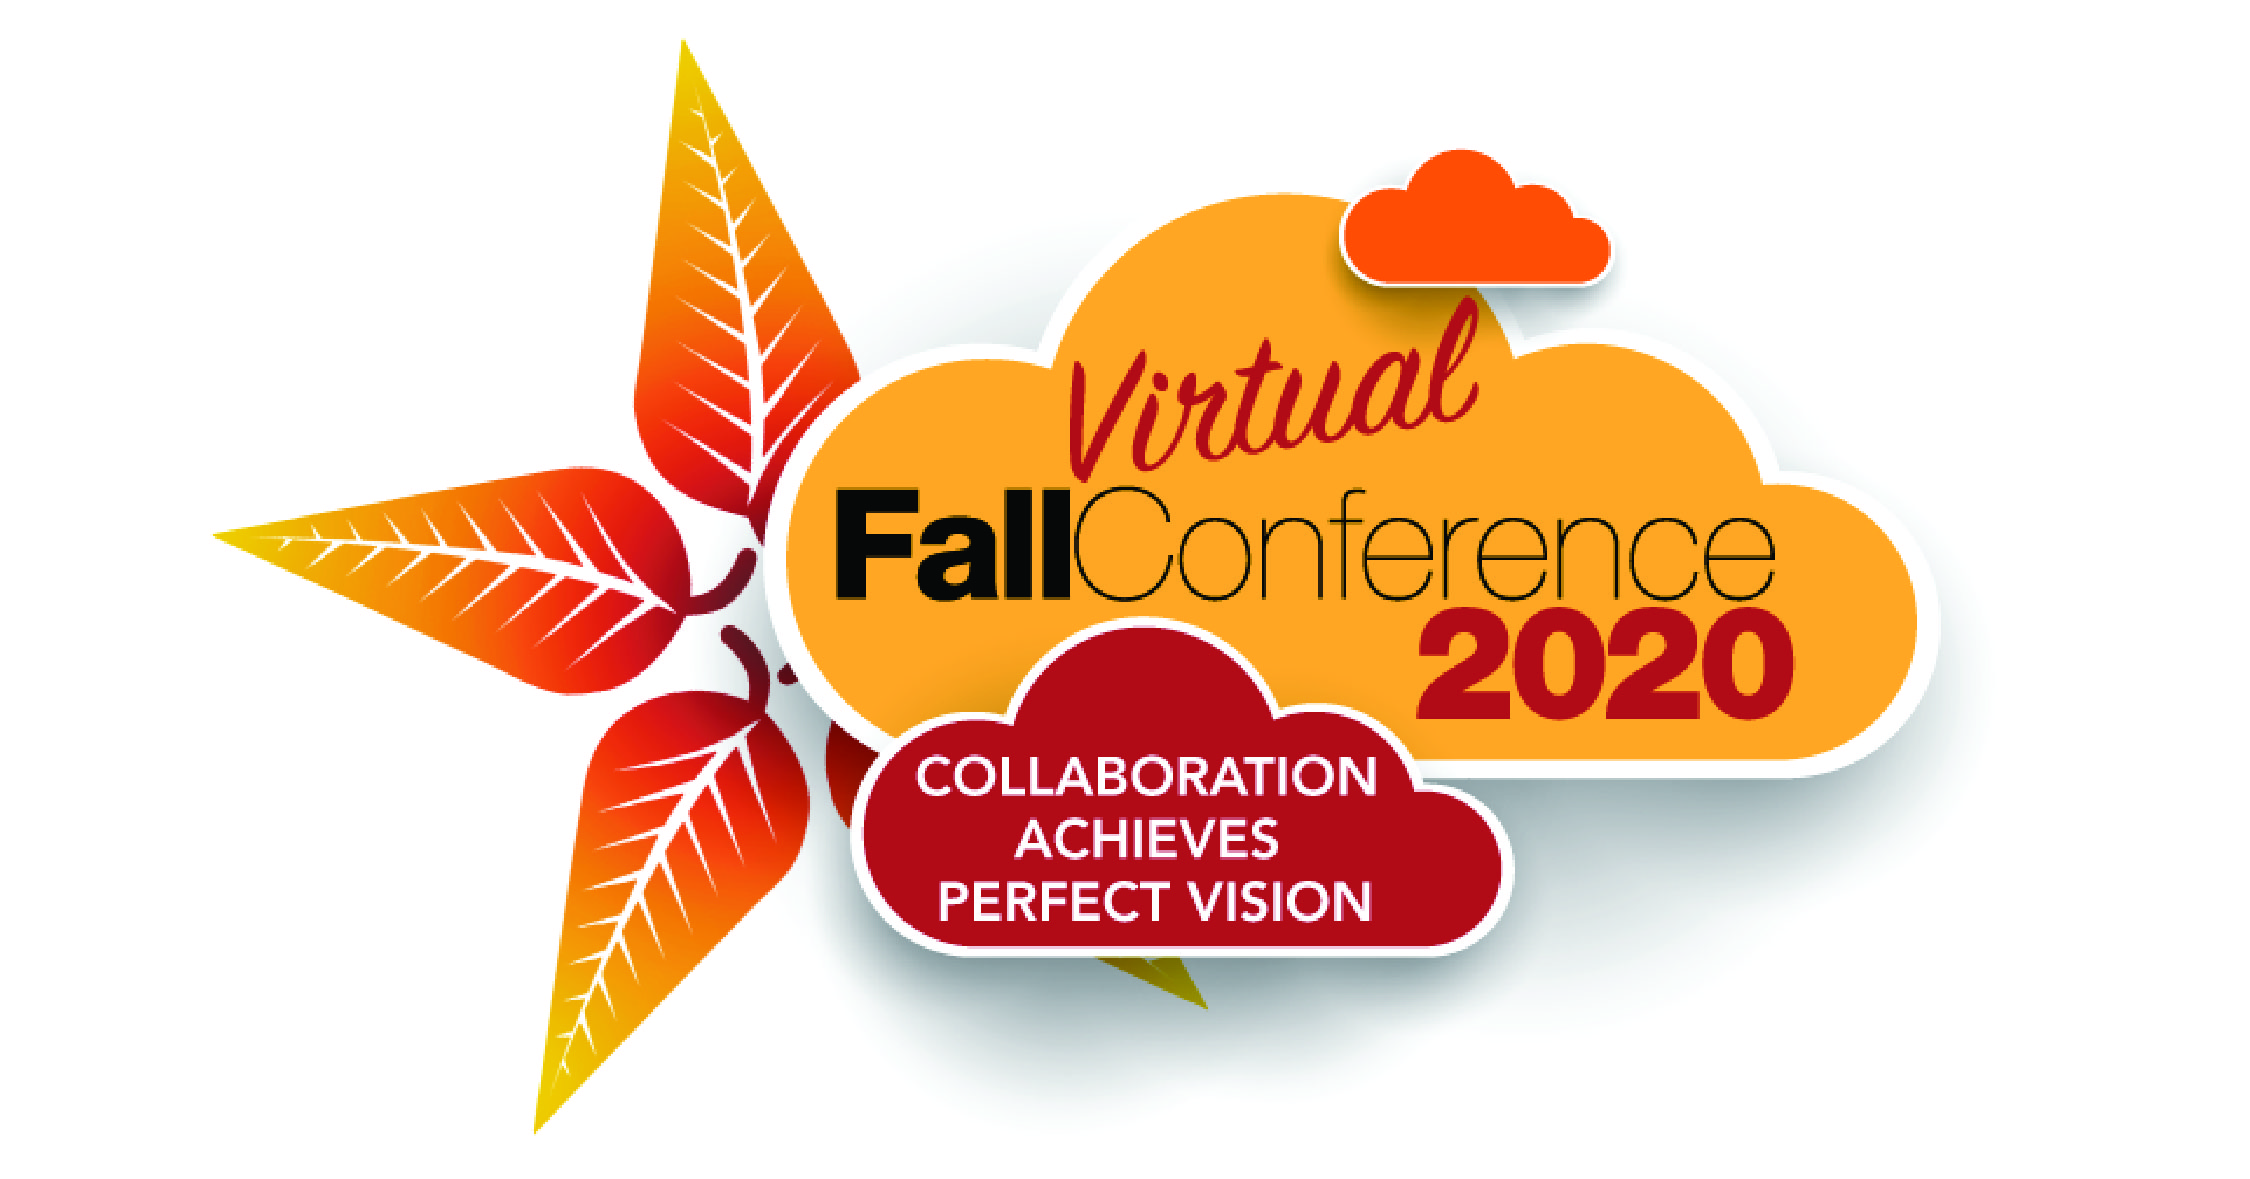 Haney’s Dan Haney and Stephanie Love to Speak at FTA’s Virtual Fall Conference 2020